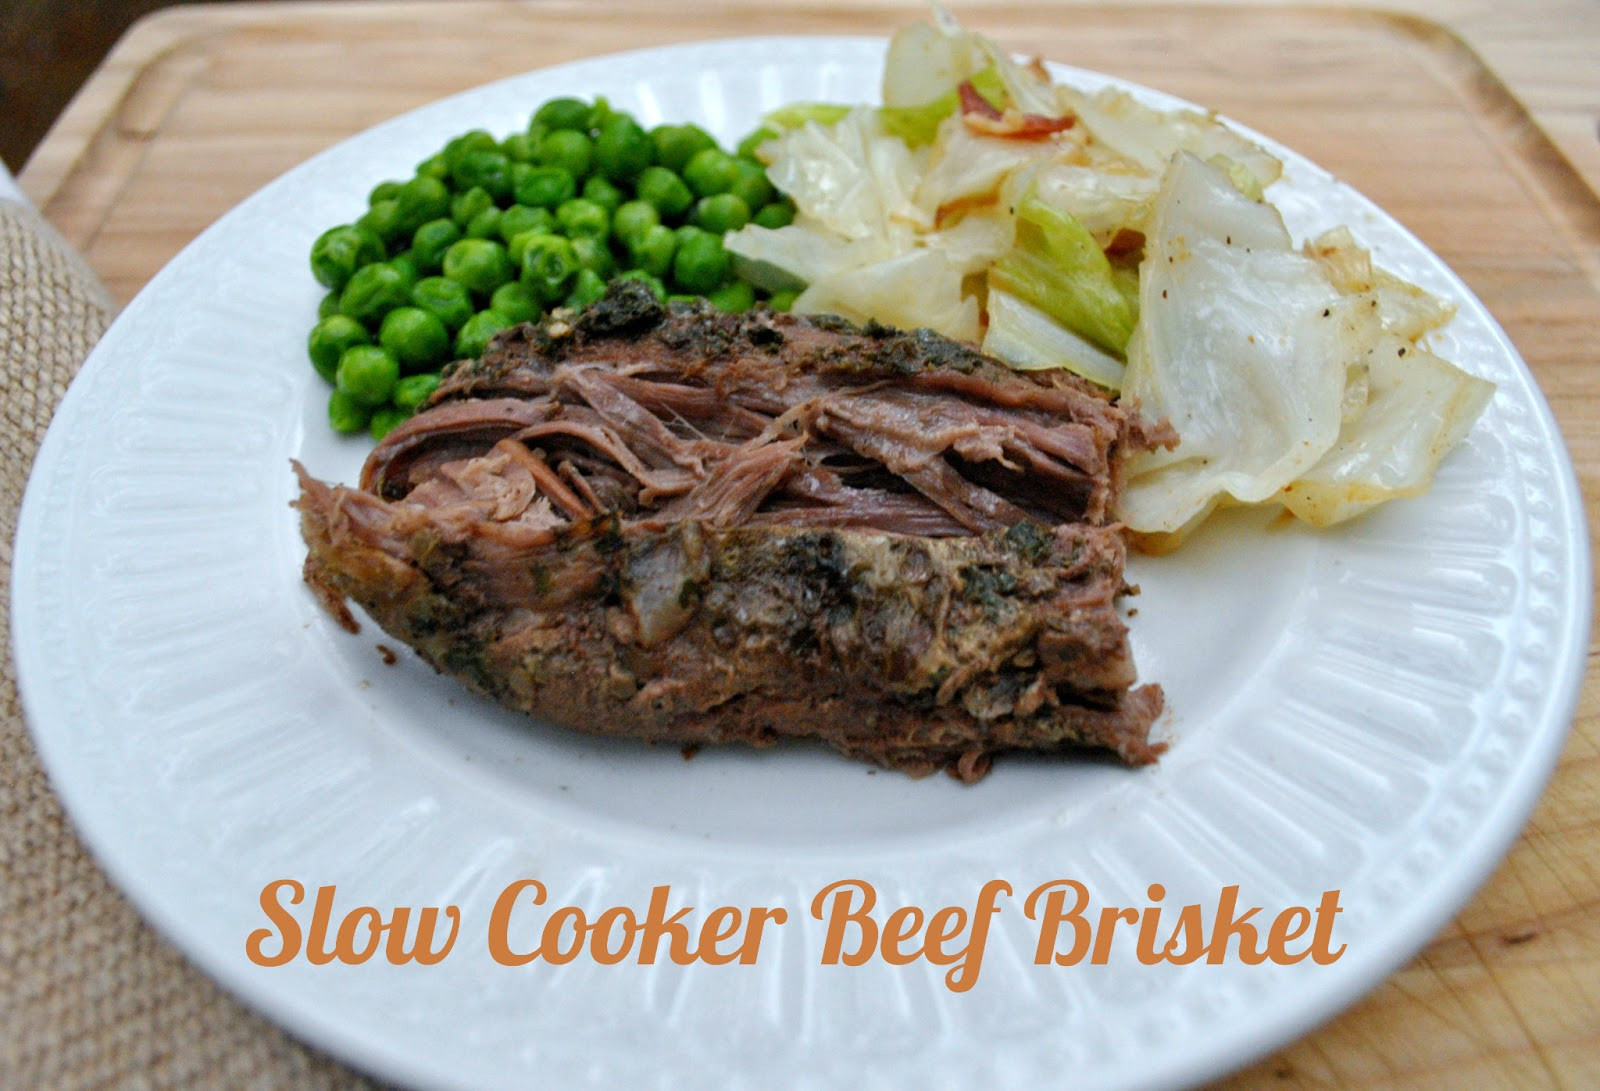 Slow Cooker Beef Brisket
 Life With 4 Boys Paleo Slow Cooker Beef Brisket